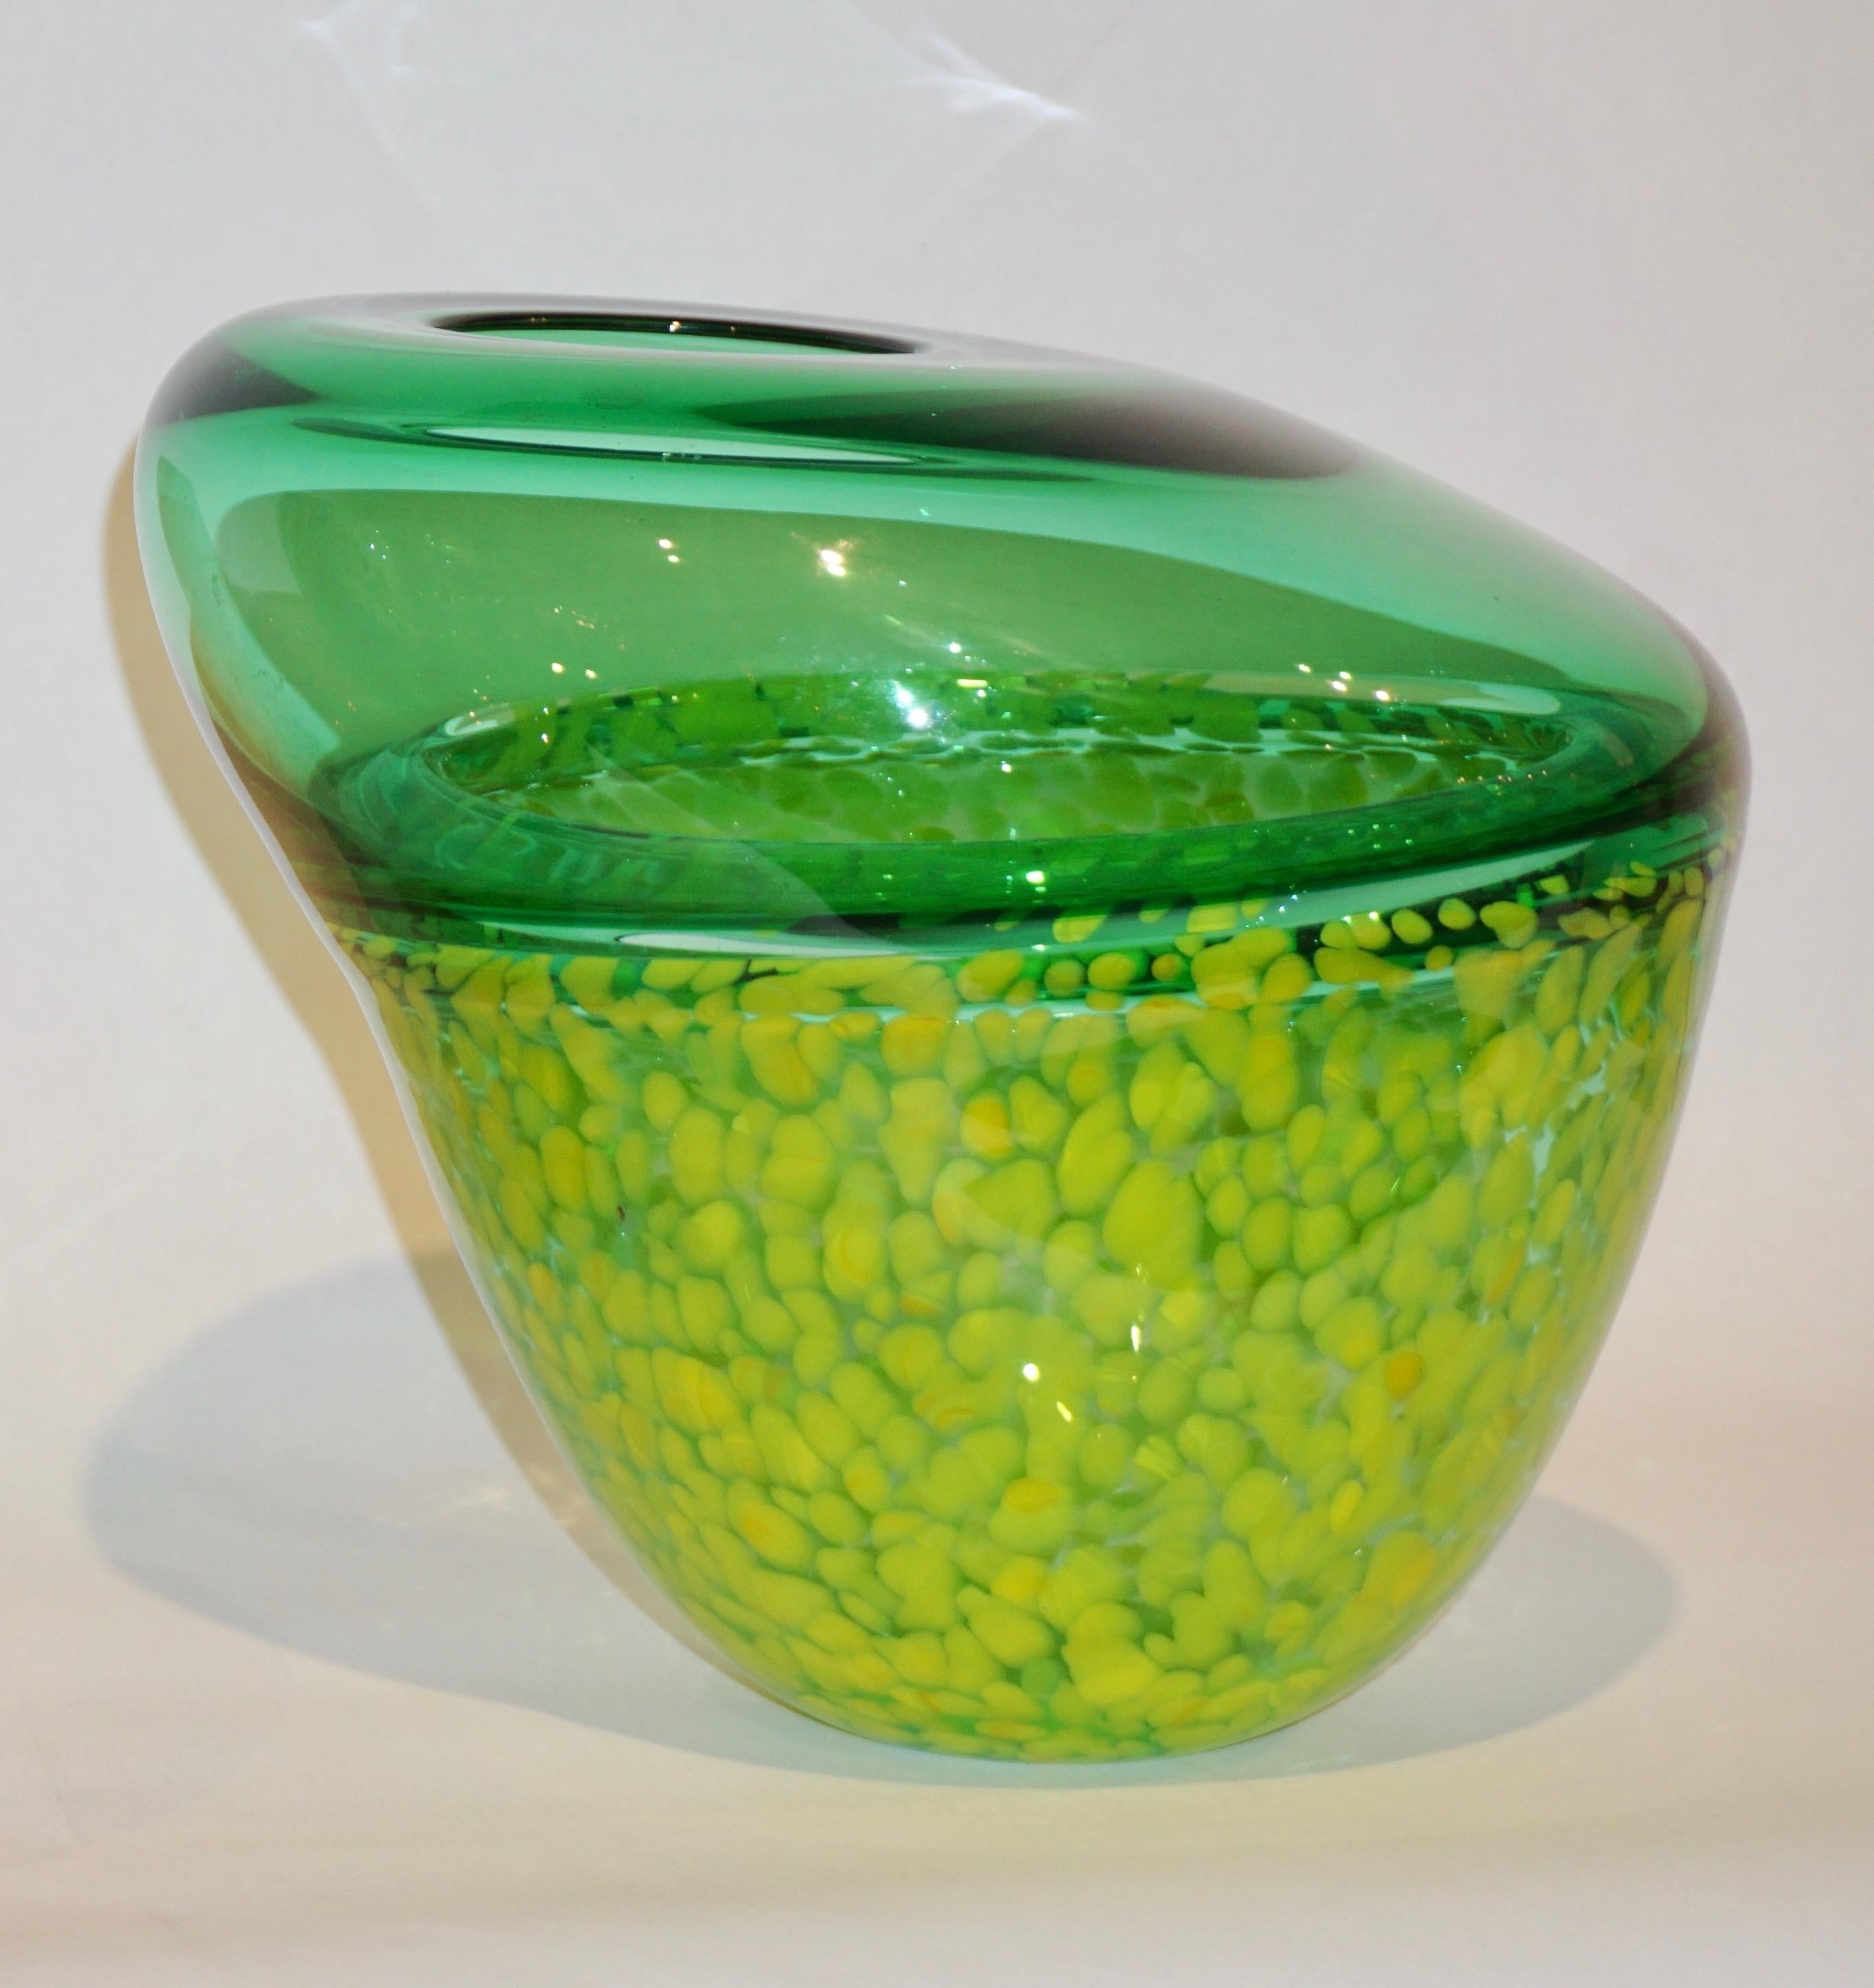 Hilton McConnico by Formia 1990s Italian Green Spotted Murano Art Glass Vase 3